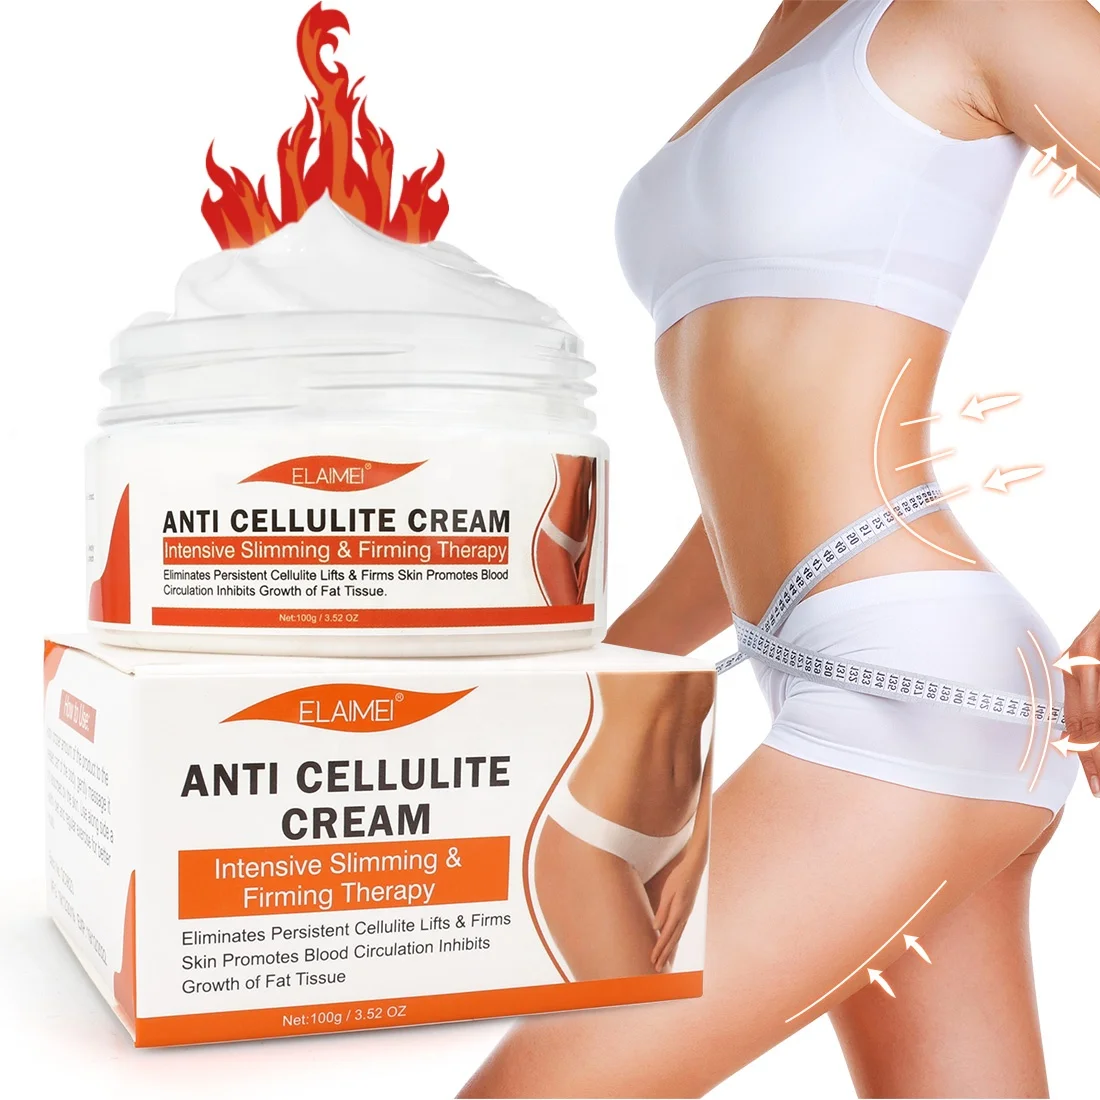 

ELAIMEI Weight Loss Hot Slimming Firming Fat Burning Anti Cellulite Cream